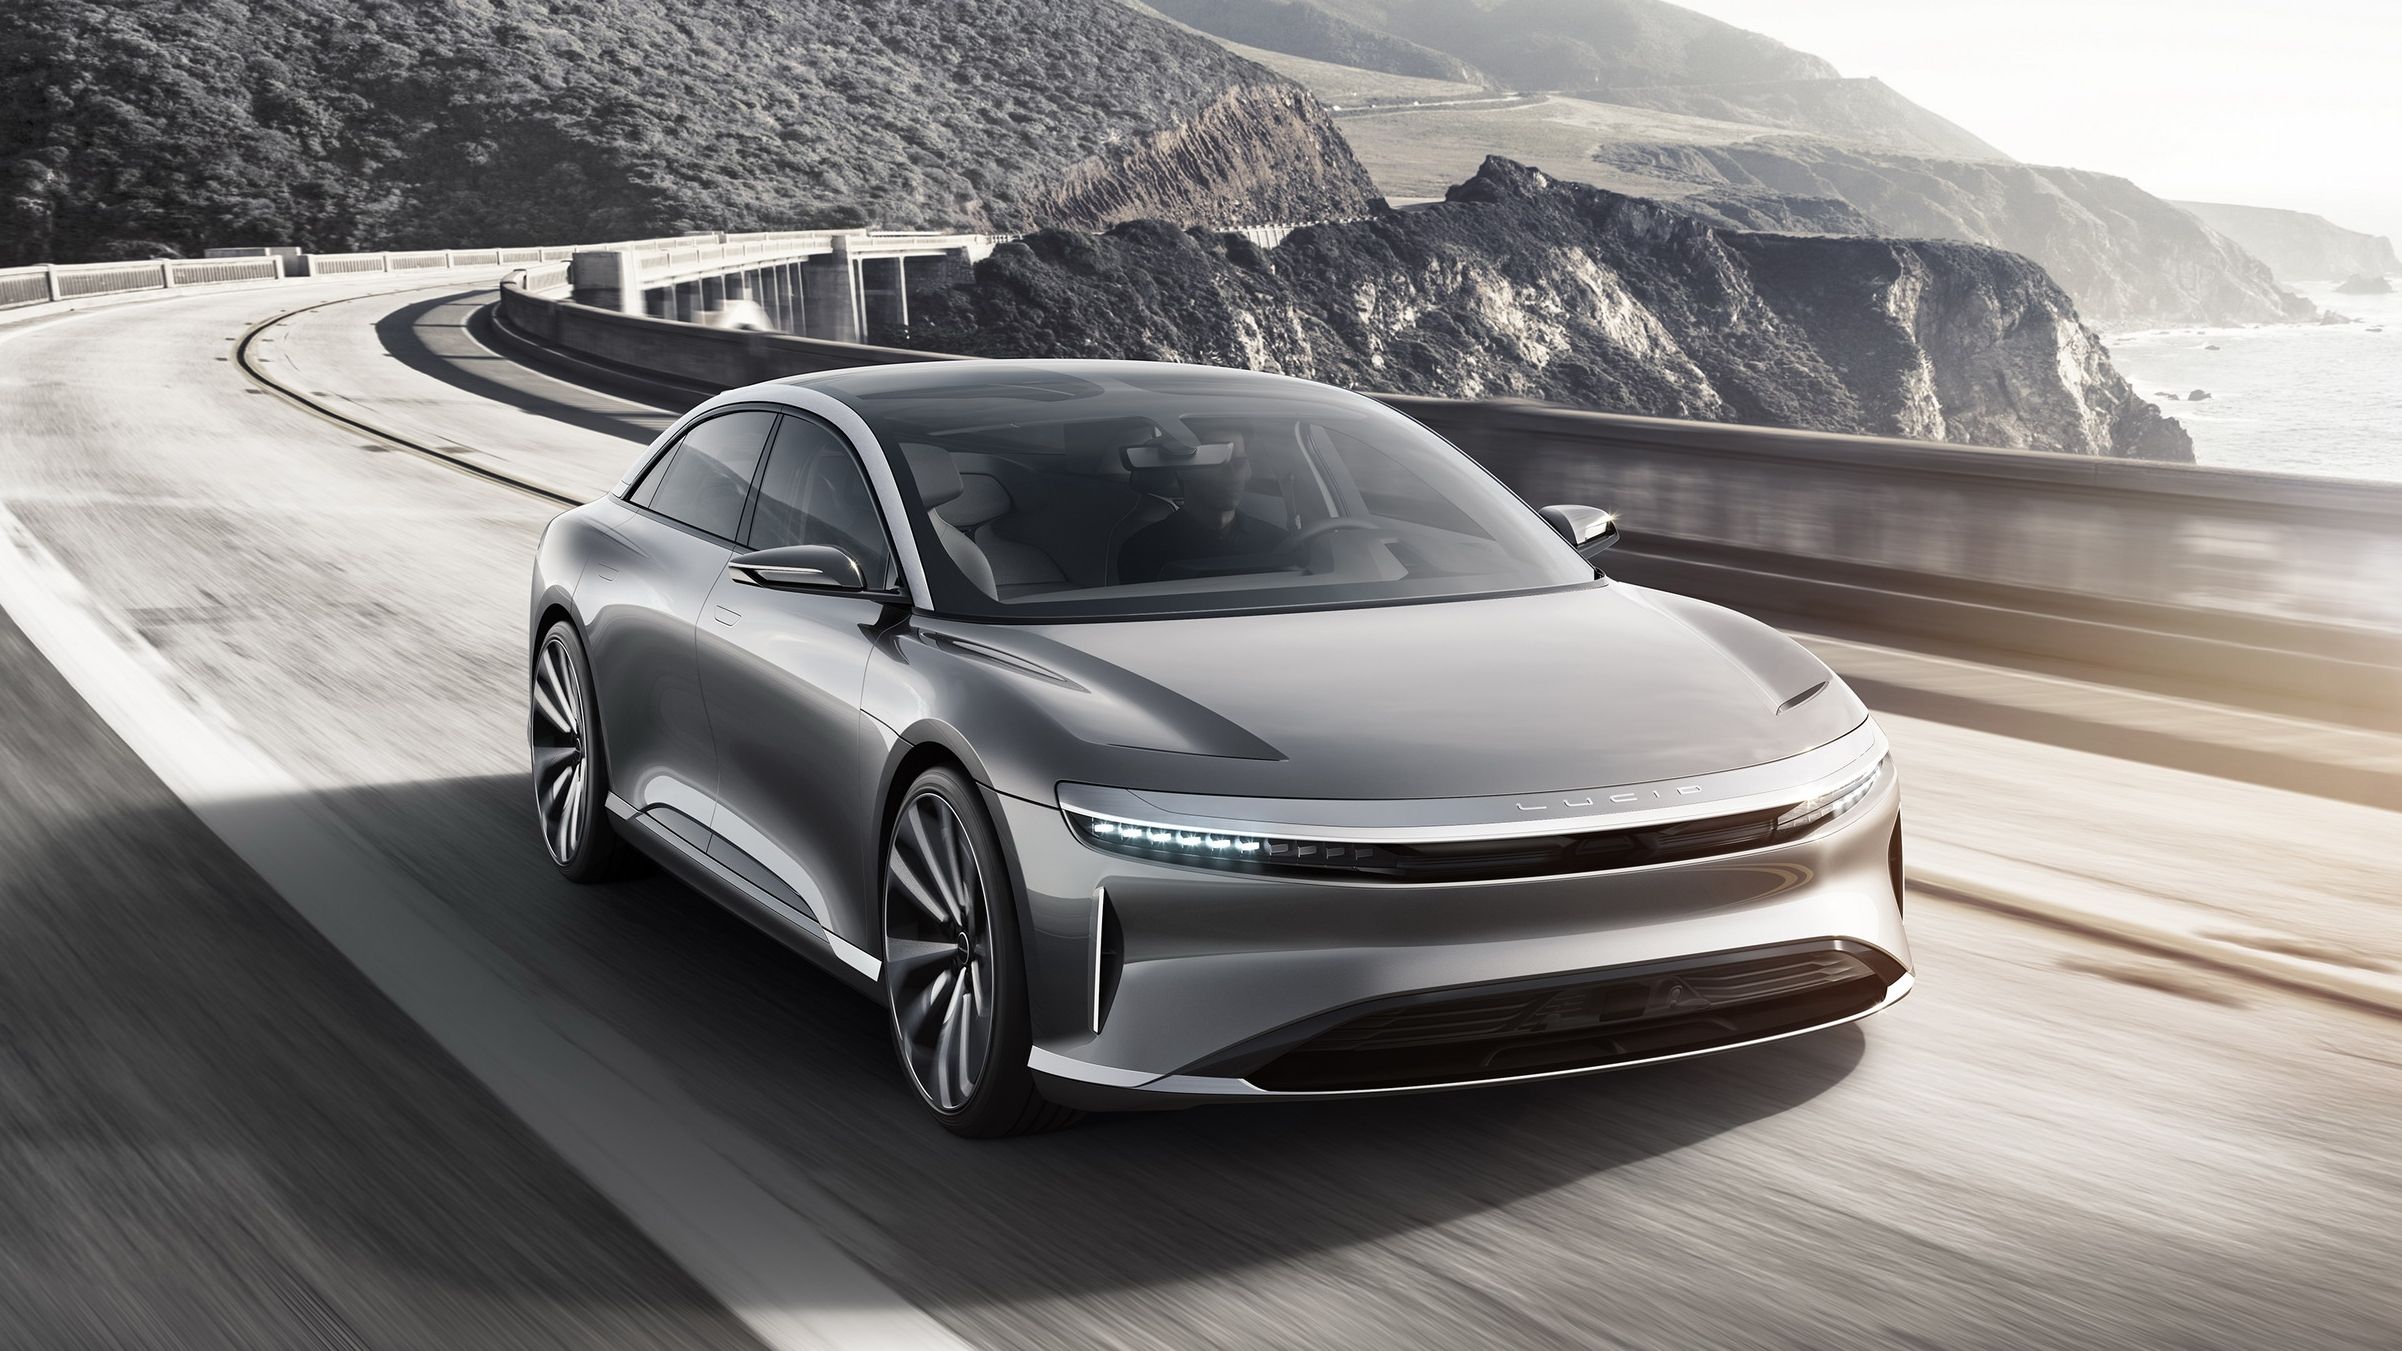 1961 - 1972 The Lucid Air Could Dethrone the Tesla Model S With A Range Of 442 Miles